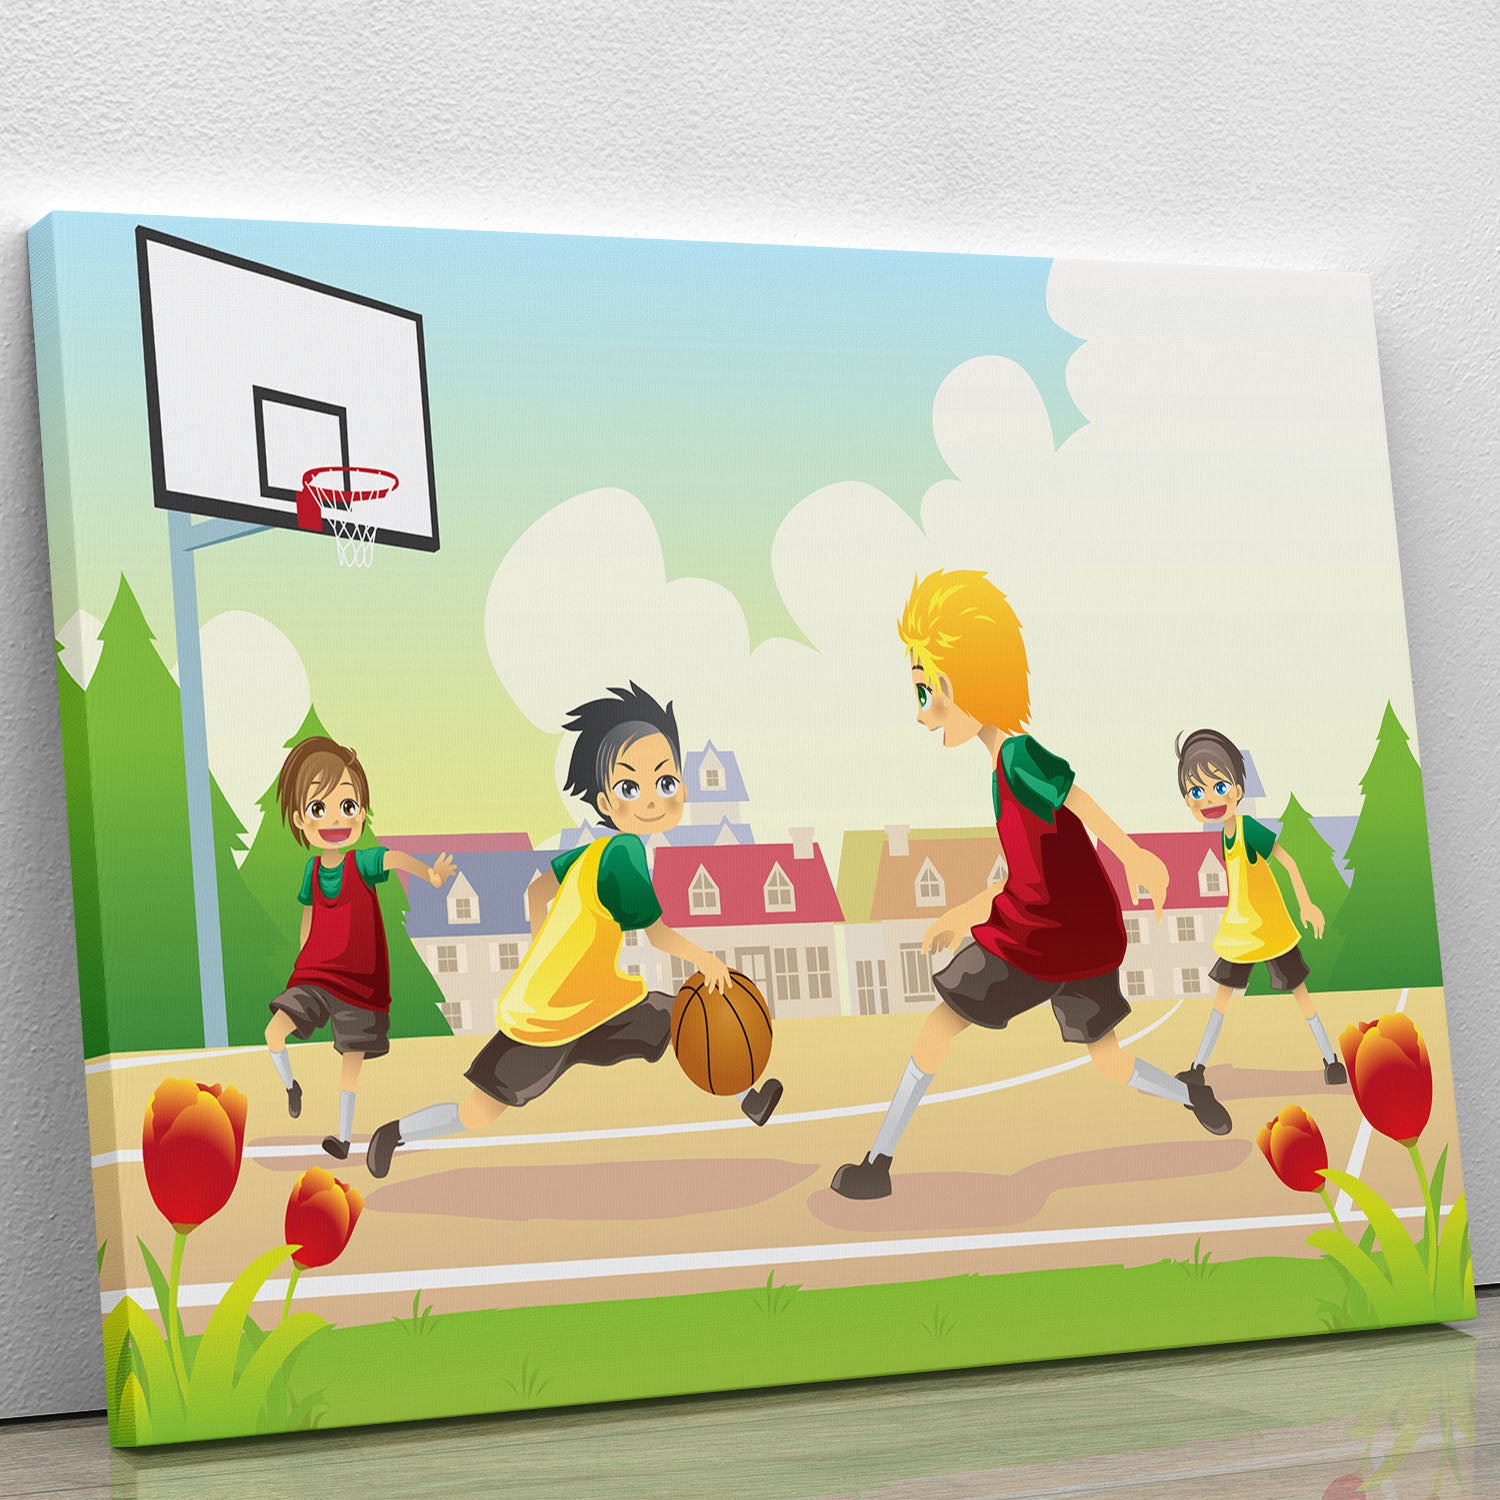 Kids playing basketball in the suburban area Canvas Print or Poster - Canvas Art Rocks - 1